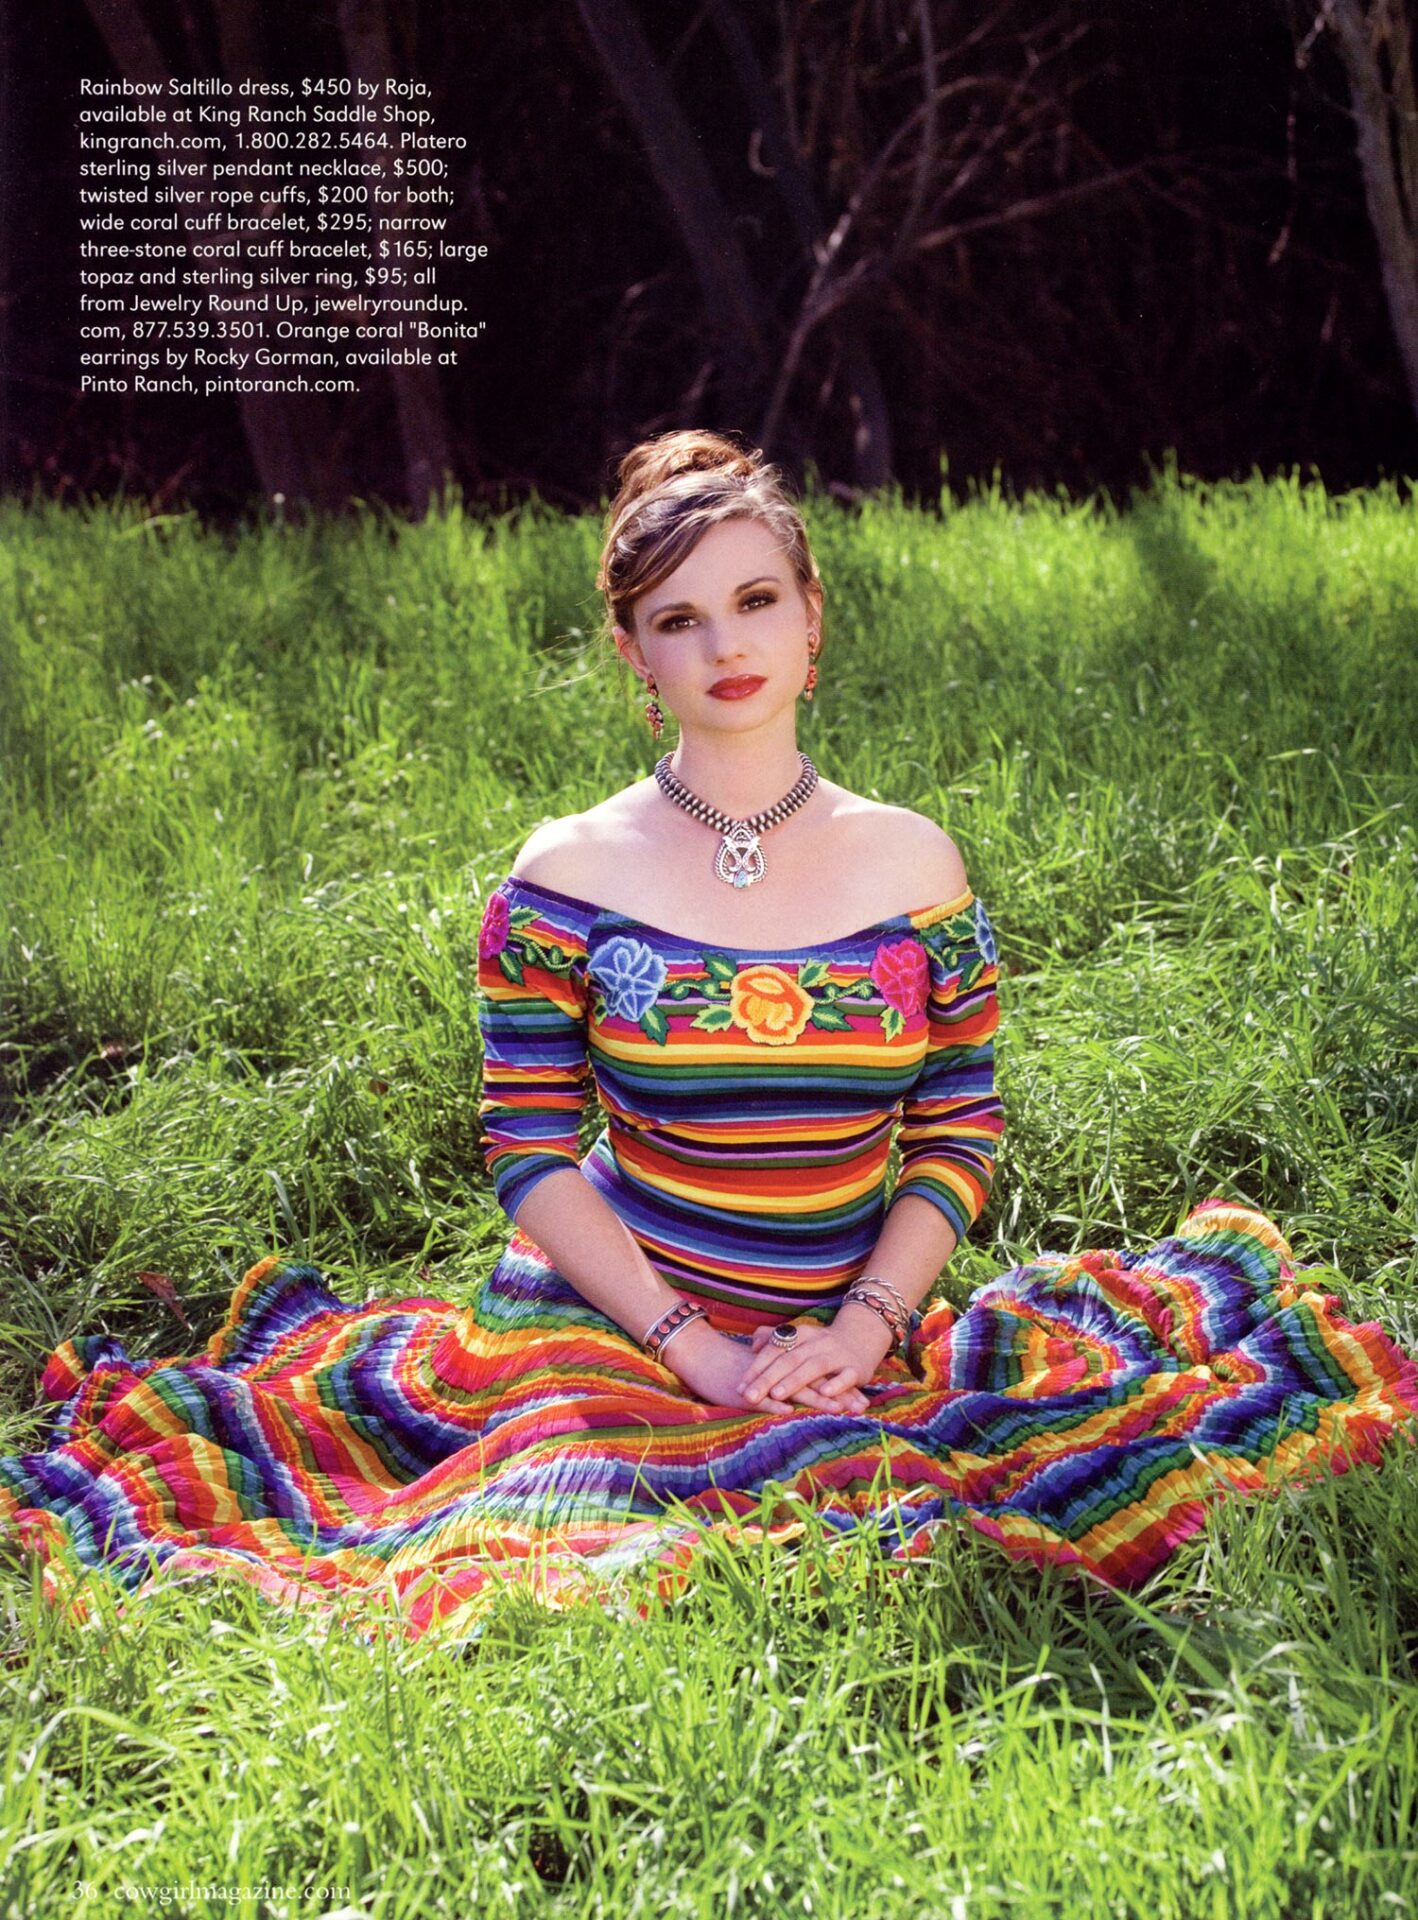 A woman in a colorful dress sitting in the grass.